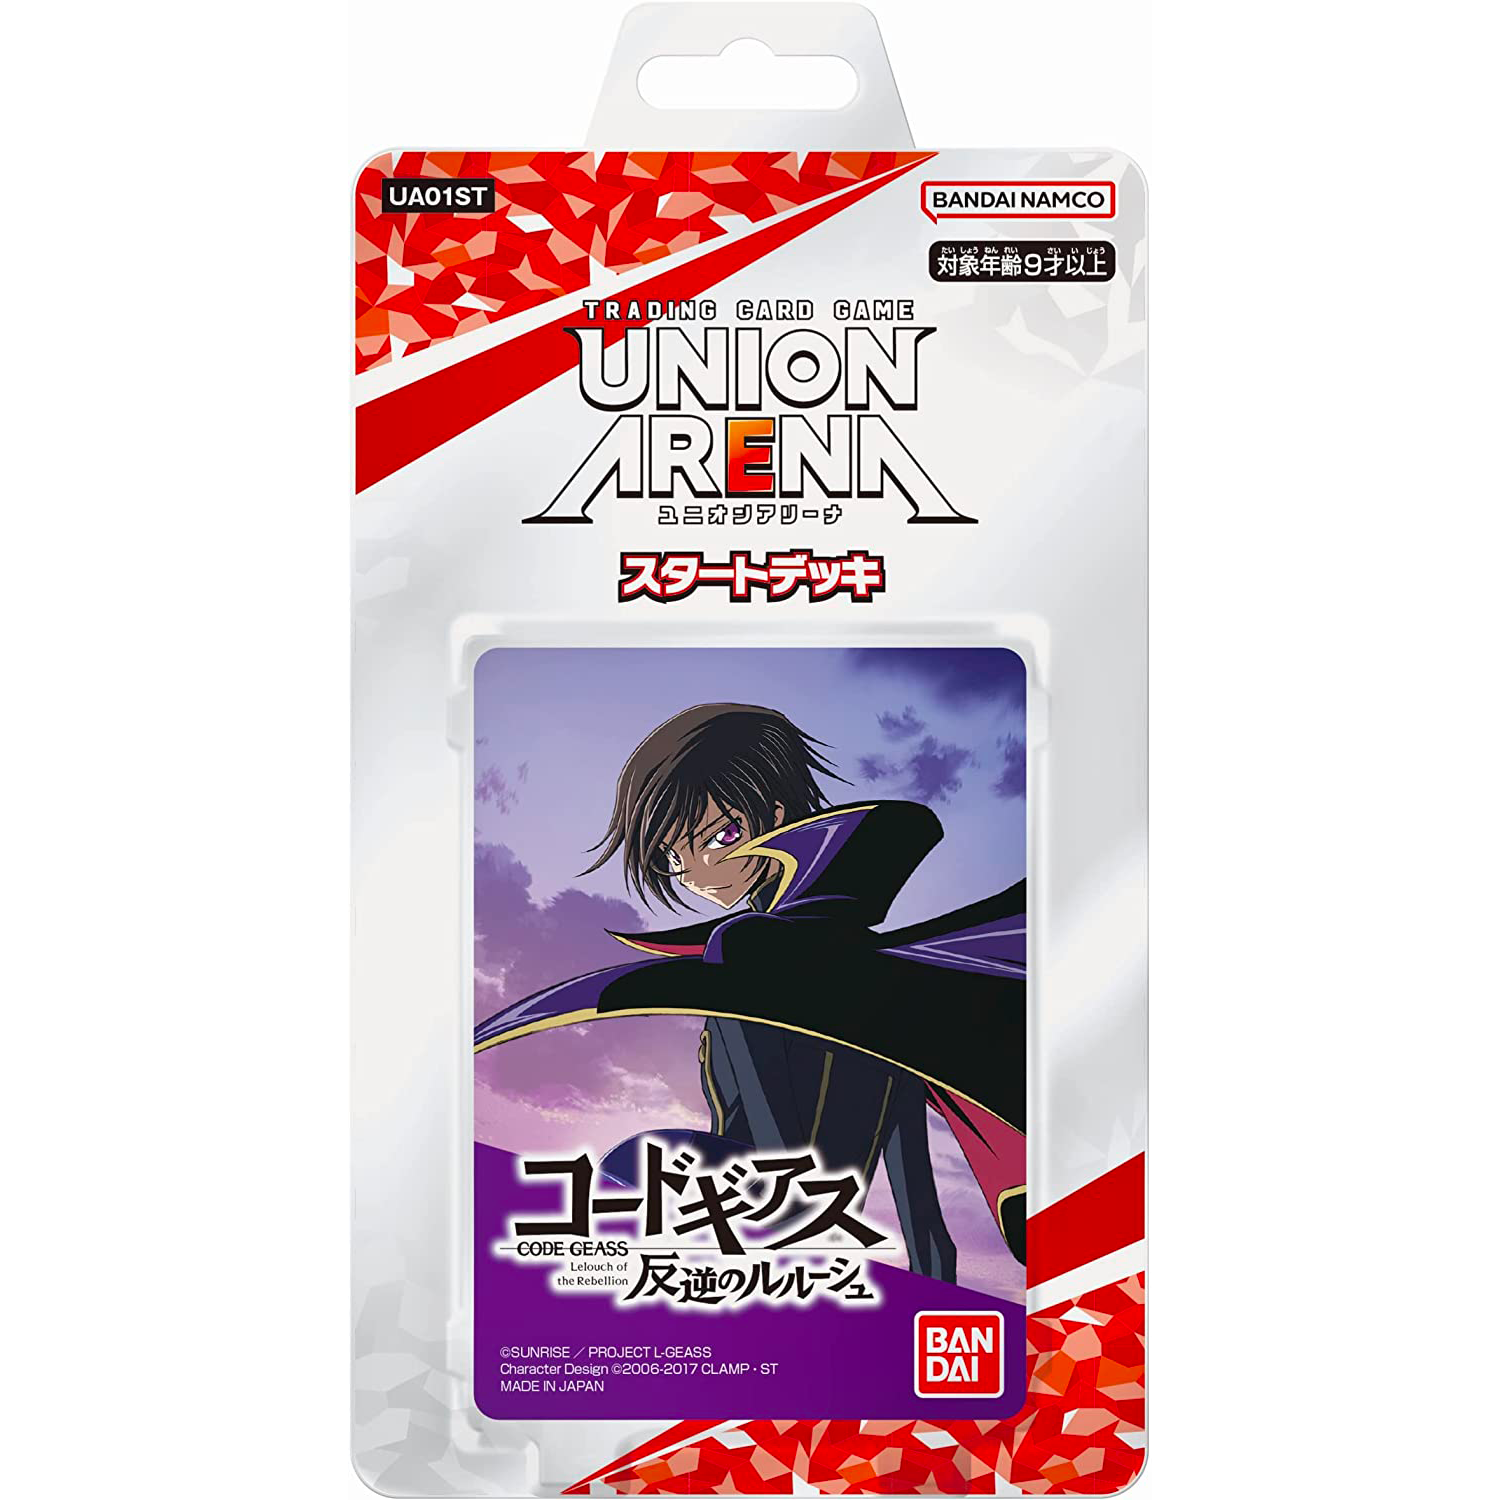 TRADING CARD GAME UNION ARENA STARTER DECK [UA01ST] CODE GEASS Lelouch of the Rebellion  Release date: March 24 2023      Pre-constructed deck: 50 cards (18 types in total)     Action Point card: 3 pieces     Play sheet: 1 sheet